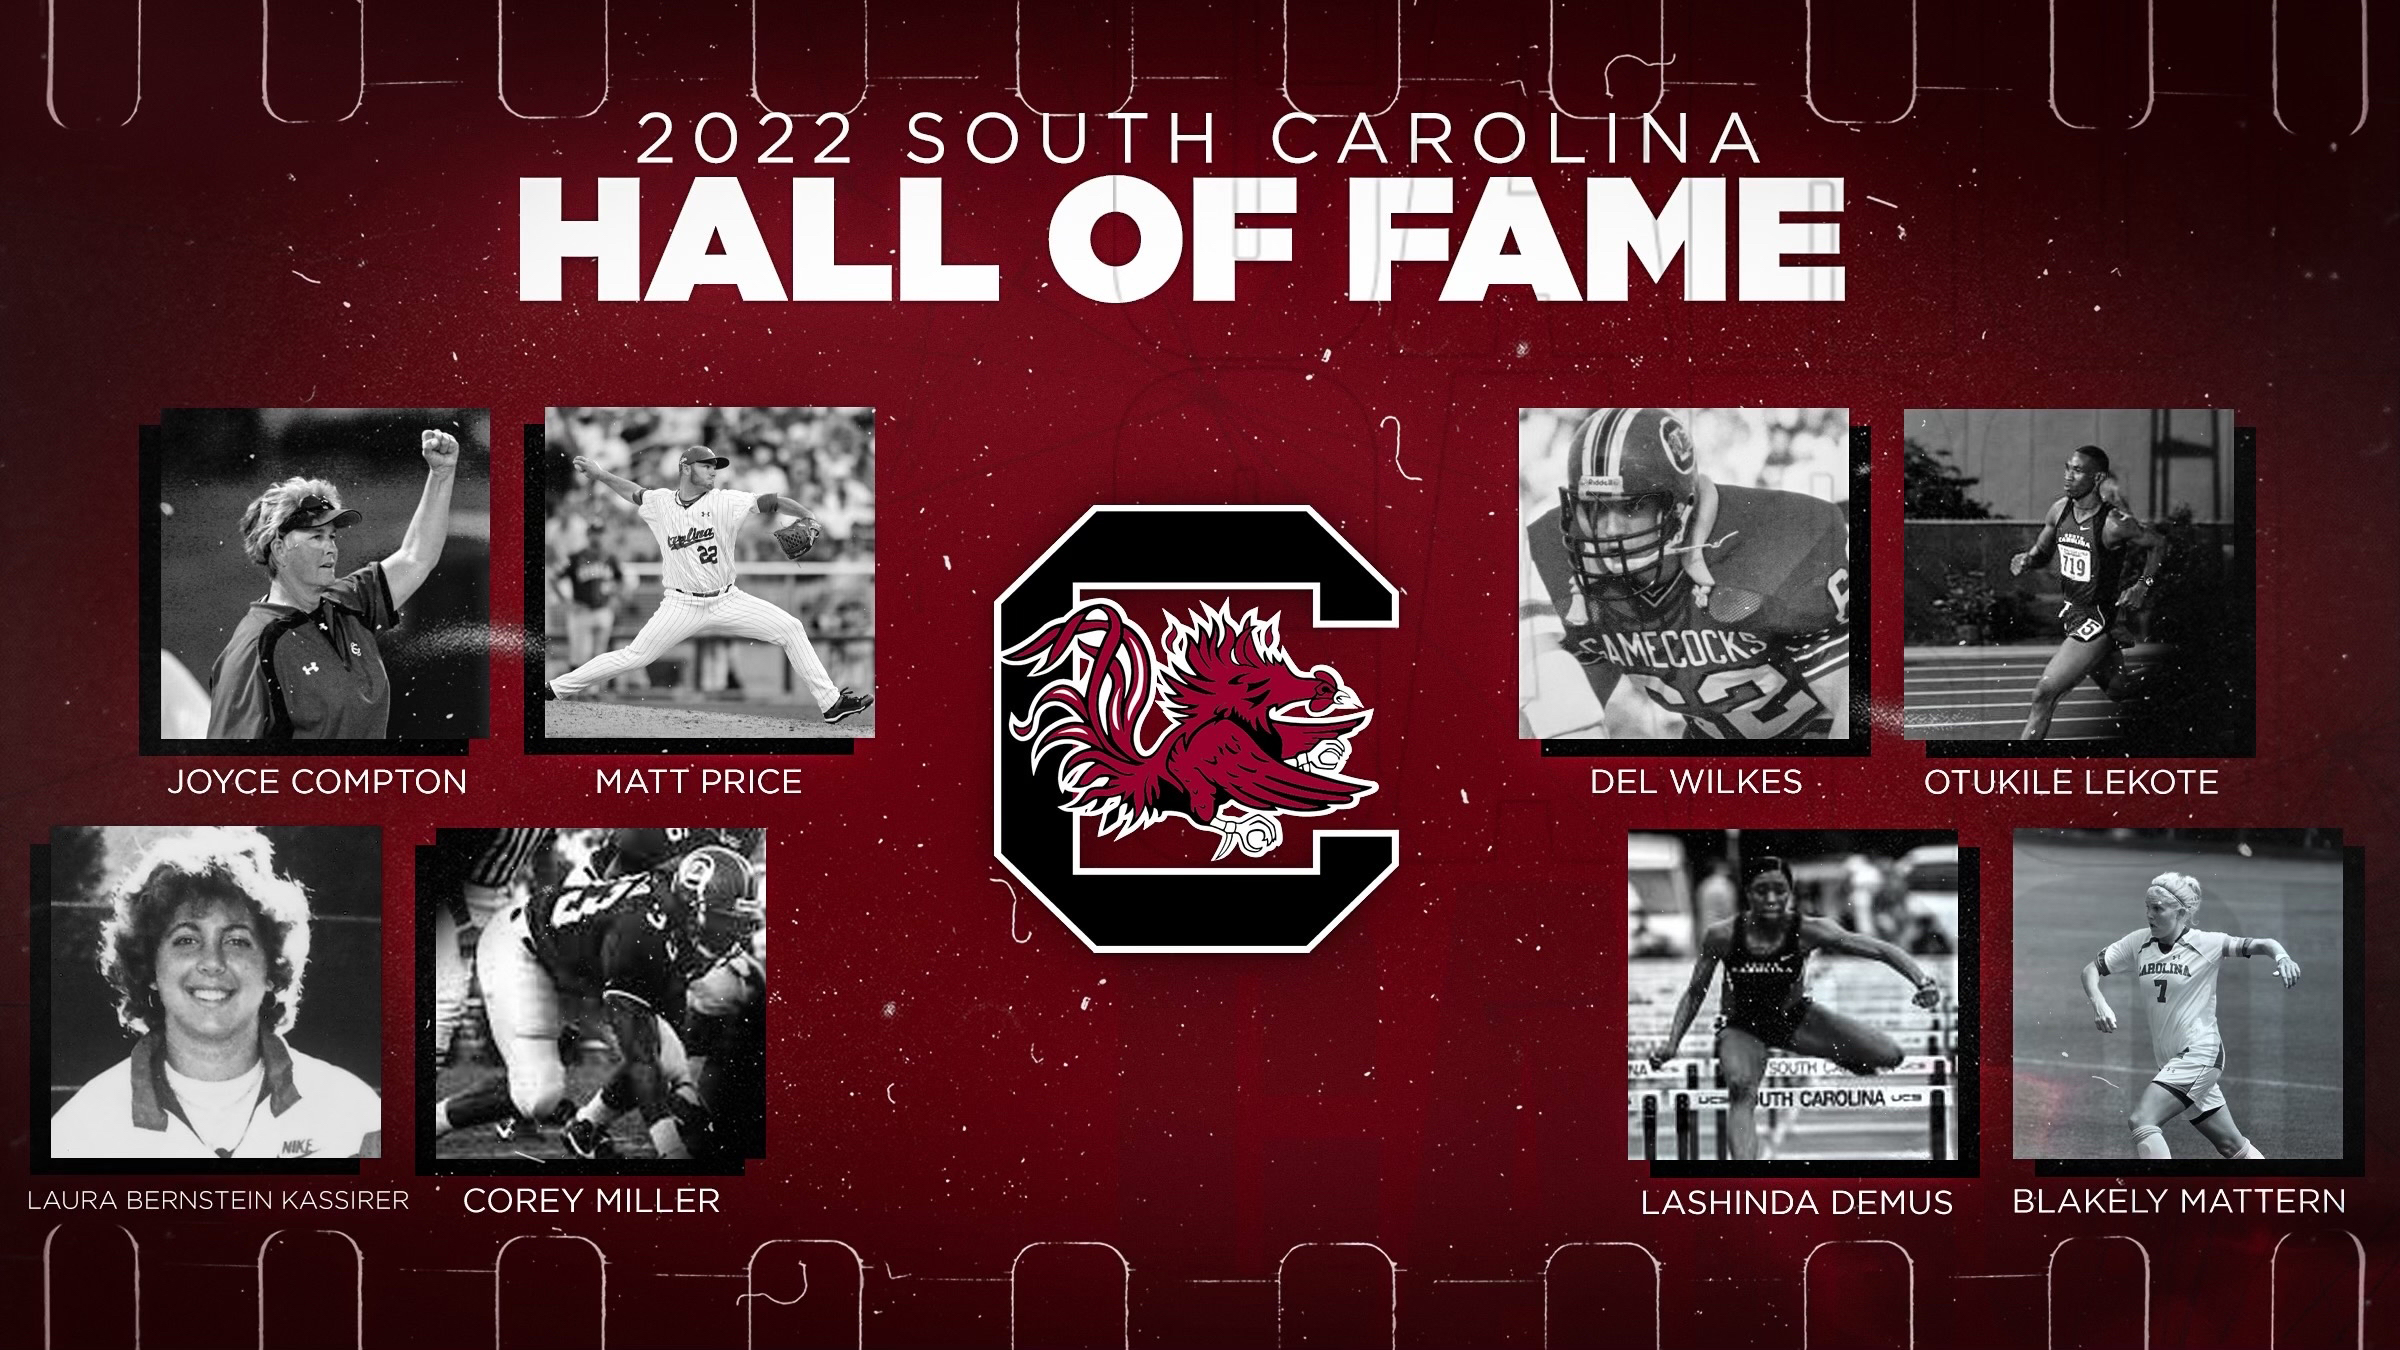 2022 Hall of Fame Induction Ceremony Set for Thursday, Oct. 27